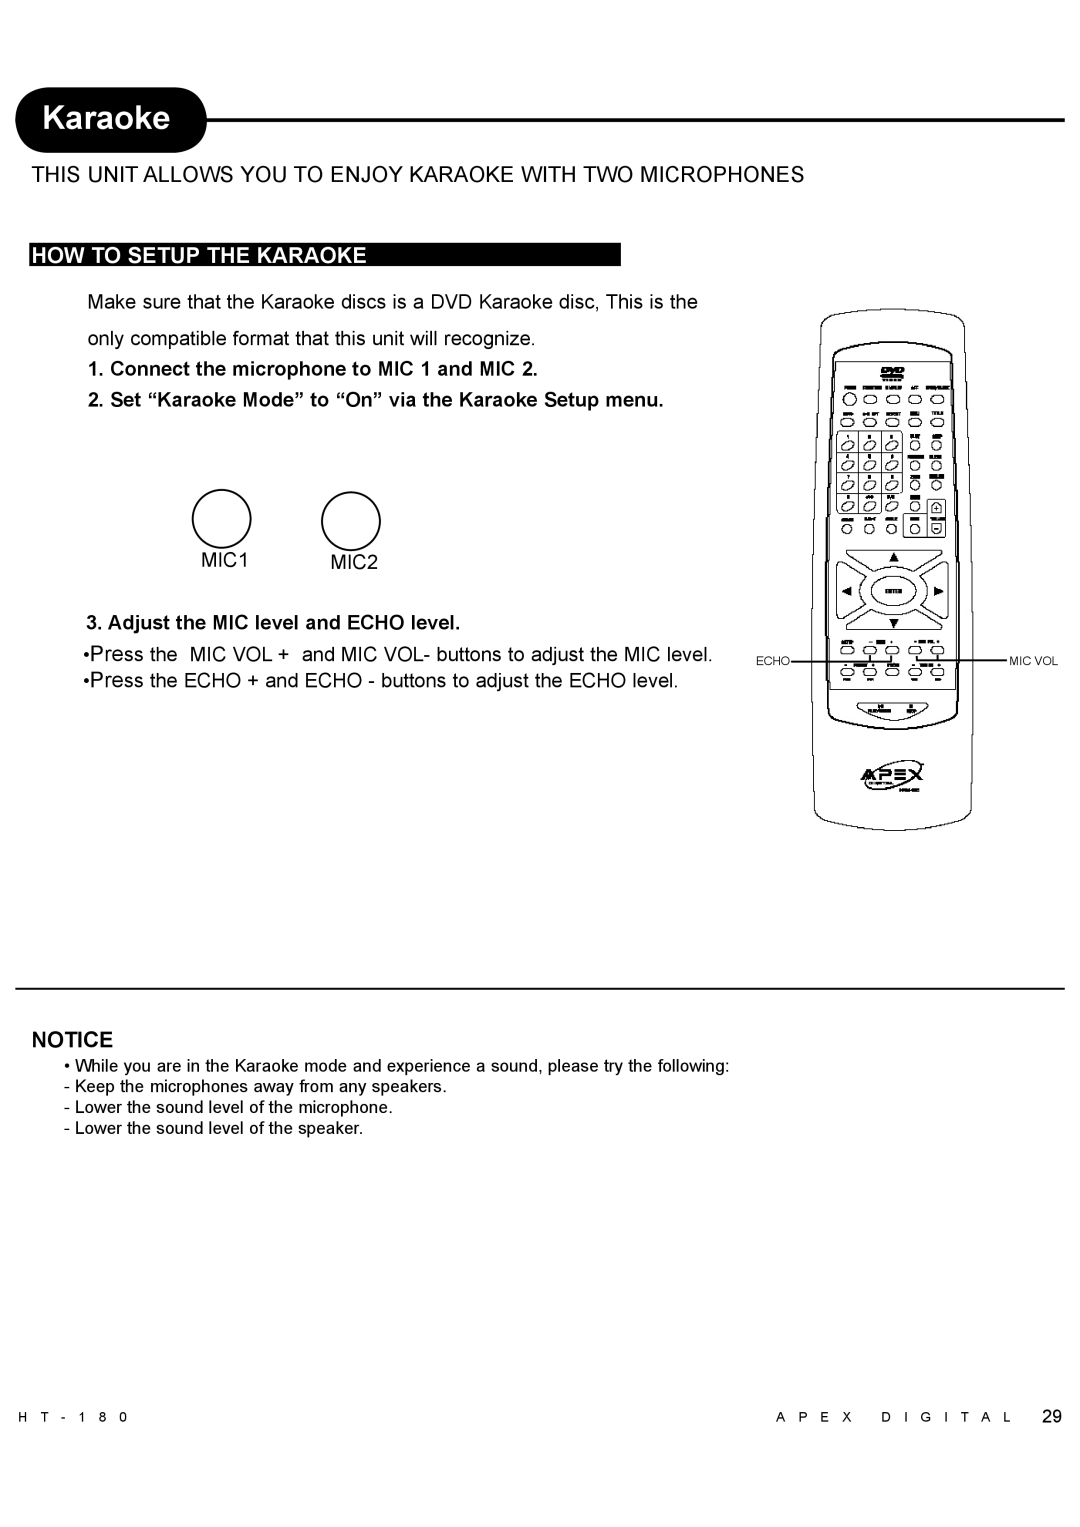 Apex Digital HT-180 manual How To Setup The Karaoke, Connect the microphone to MIC 1 and MIC 